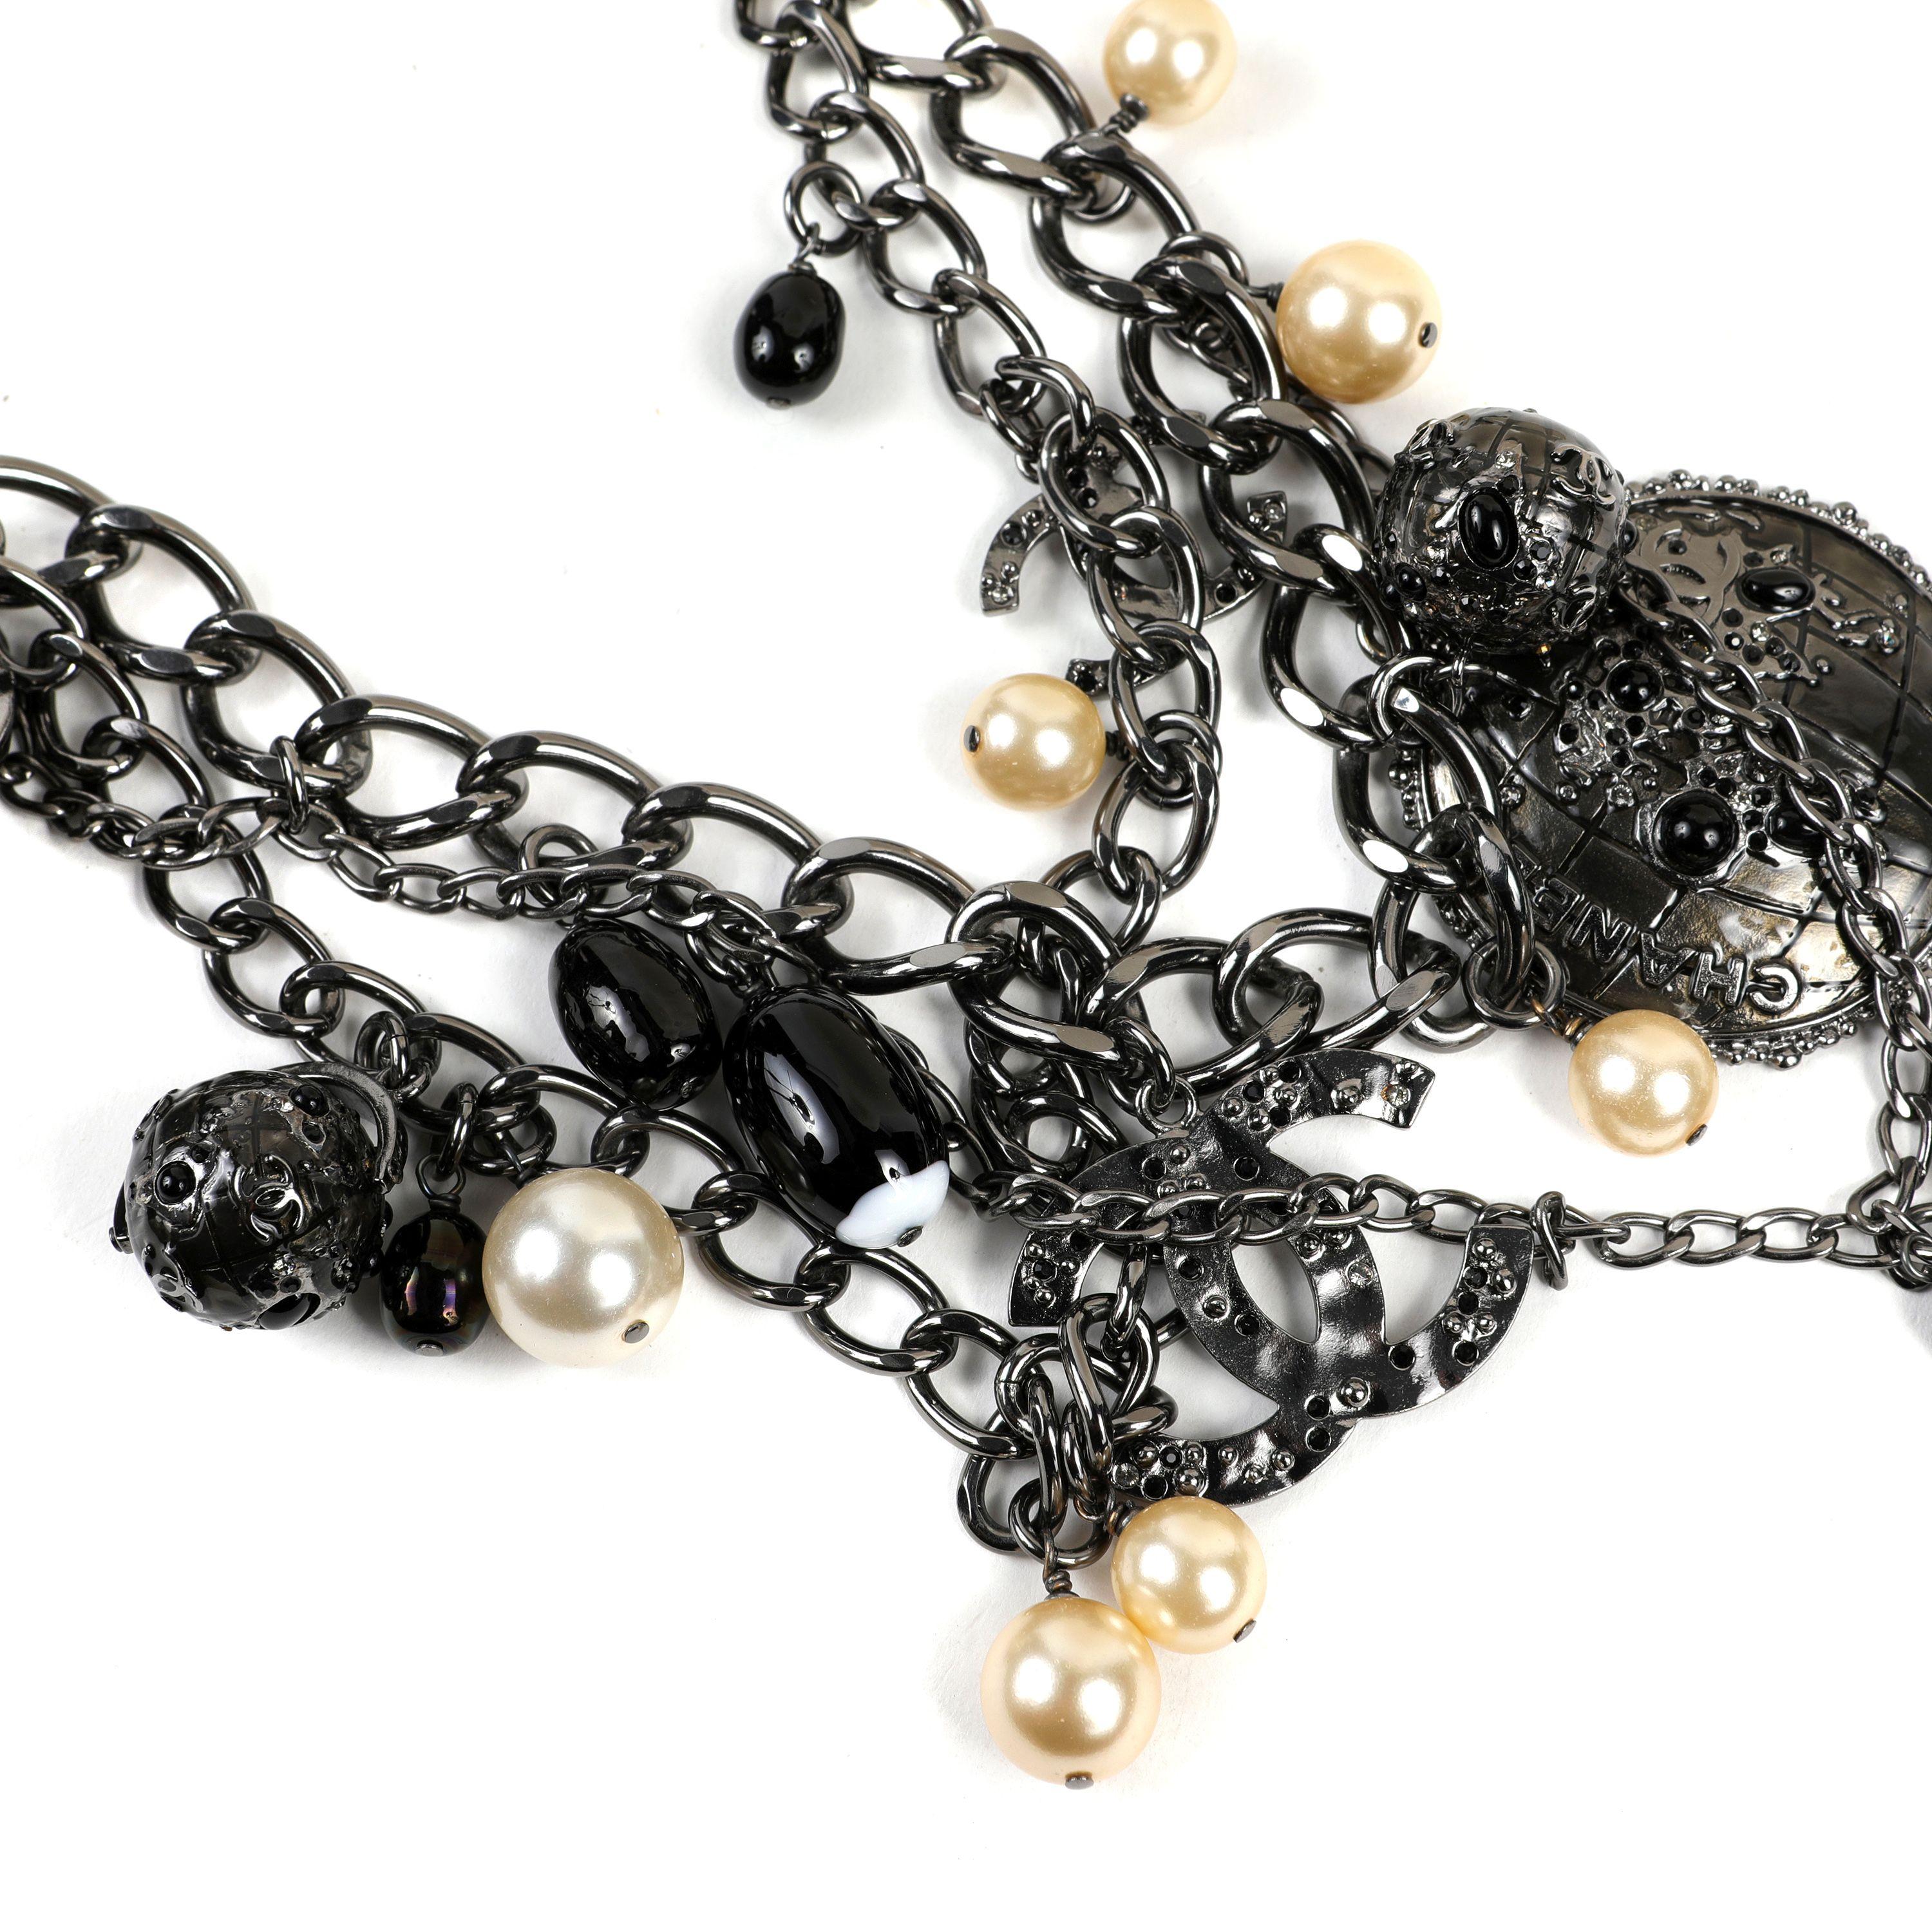 Chanel Ruthenium Globe Multi Strand Belt/ Necklace with Pearls In Excellent Condition For Sale In Palm Beach, FL